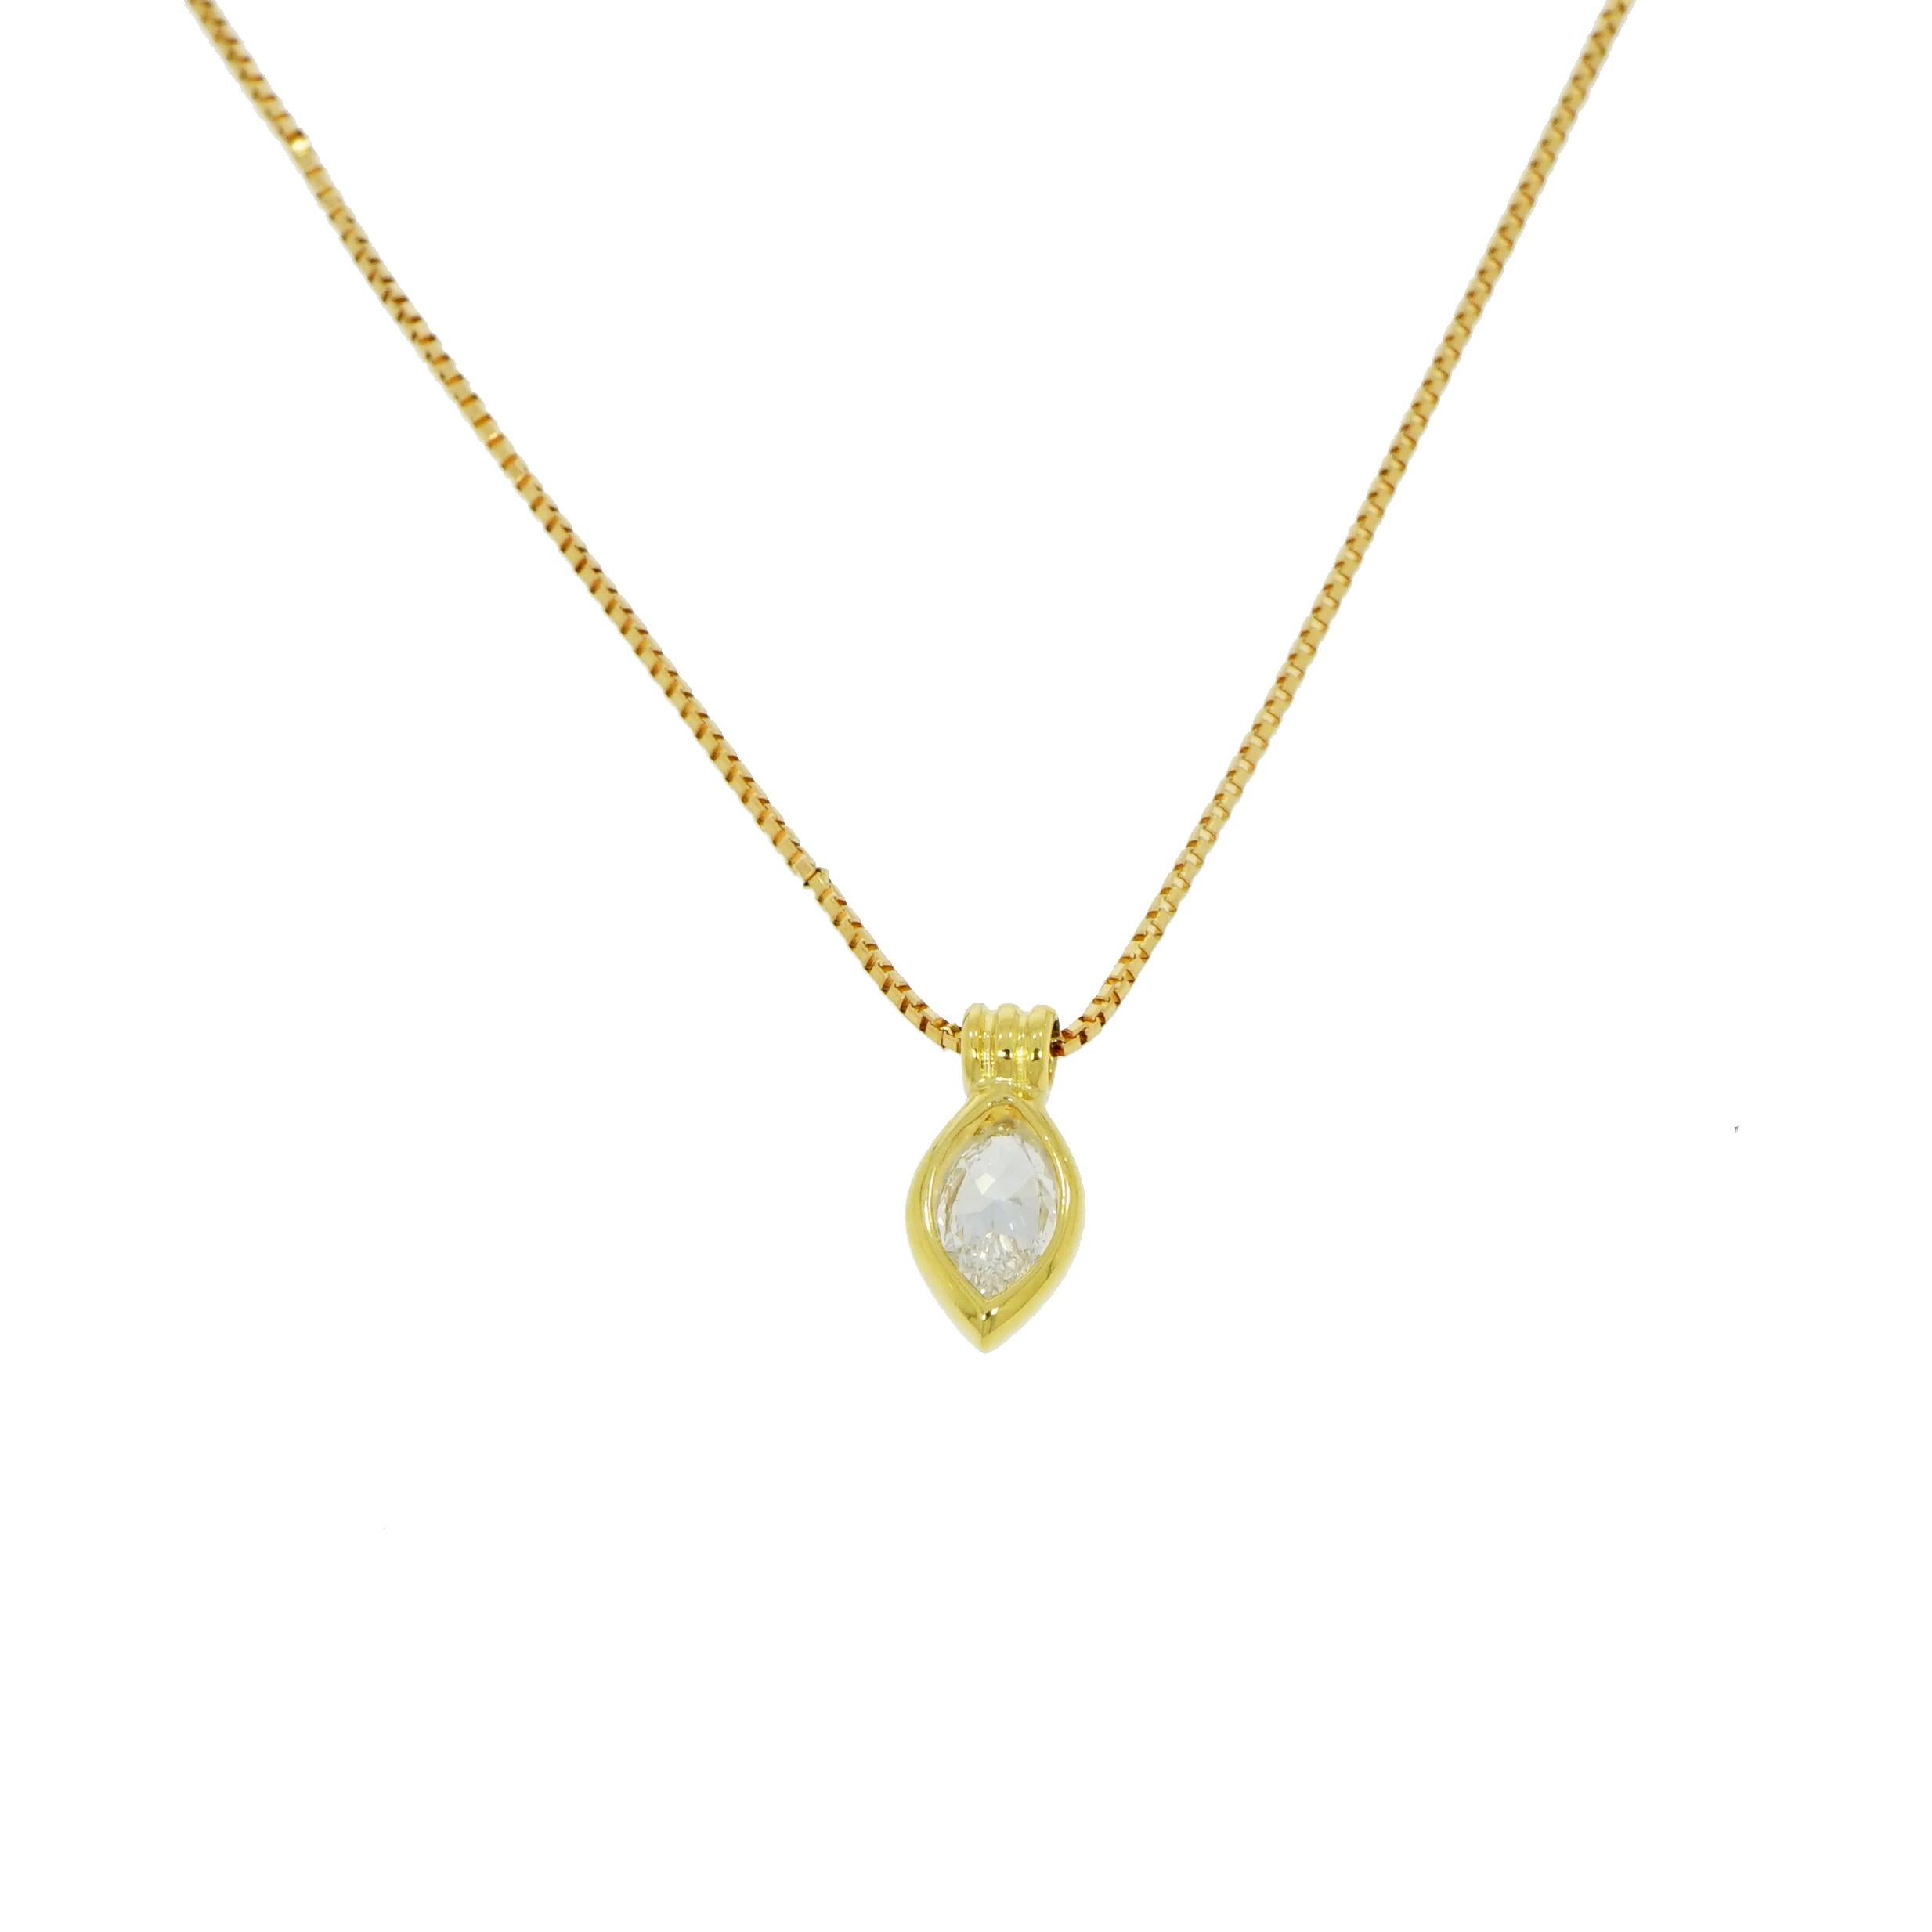 This classic Solitaire Marquise shaped Diamond Pendant is to reminds us of the space in-between that holds a special meaning in our hearts. 
The solid bezel setting features a 1.00 carat marquise shaped diamond with an open back and fixed coiled